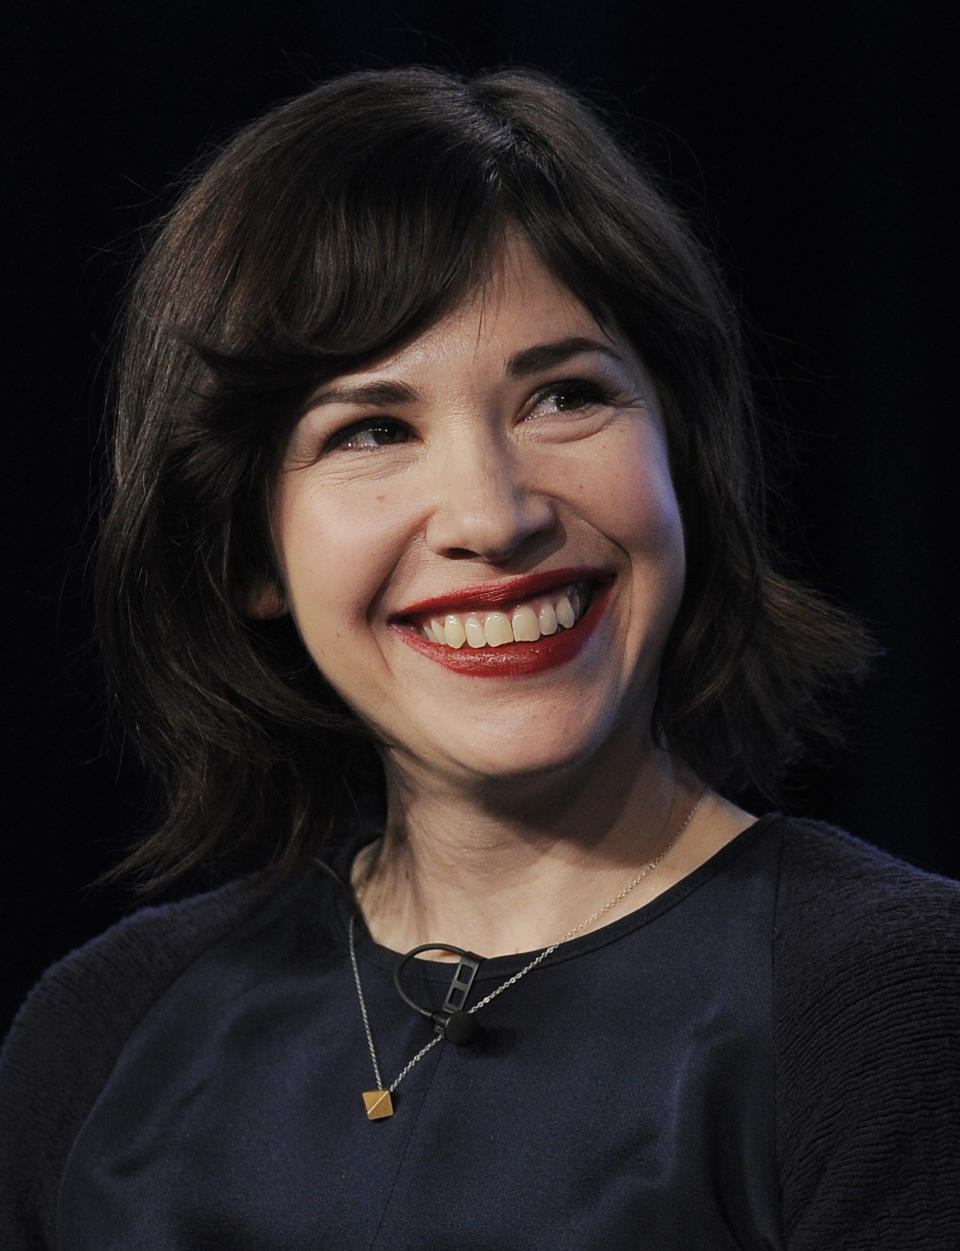 <p>The "Portlandia" star and former guitarist and vocalist for Sleater-Kinney is often assumed to identify as gay. However, she <a href="http://www.wweek.com/portland/article-16676-mock_star.html" target="_blank">told "Willamette Week" in 2012 that</a>, "It&rsquo;s weird, because no one&rsquo;s actually ever asked me. People just always assume, like, you&rsquo;re this or that. It&rsquo;s like, &lsquo;OK. I&rsquo;m bisexual.&rsquo;&rdquo;</p>